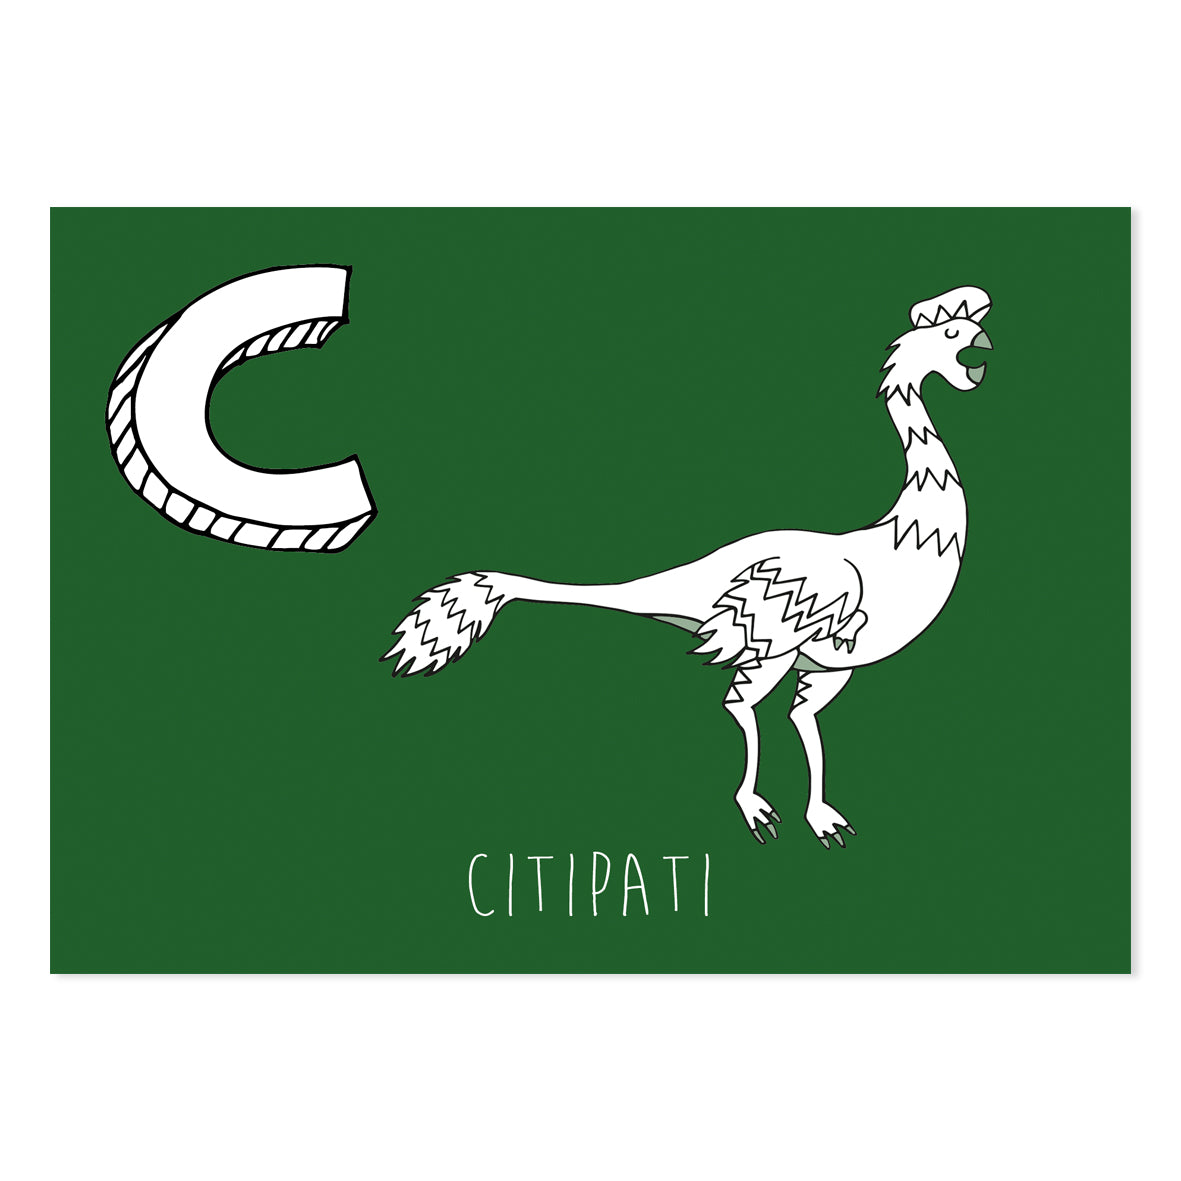 Green postcard featuring the letter C for citipati